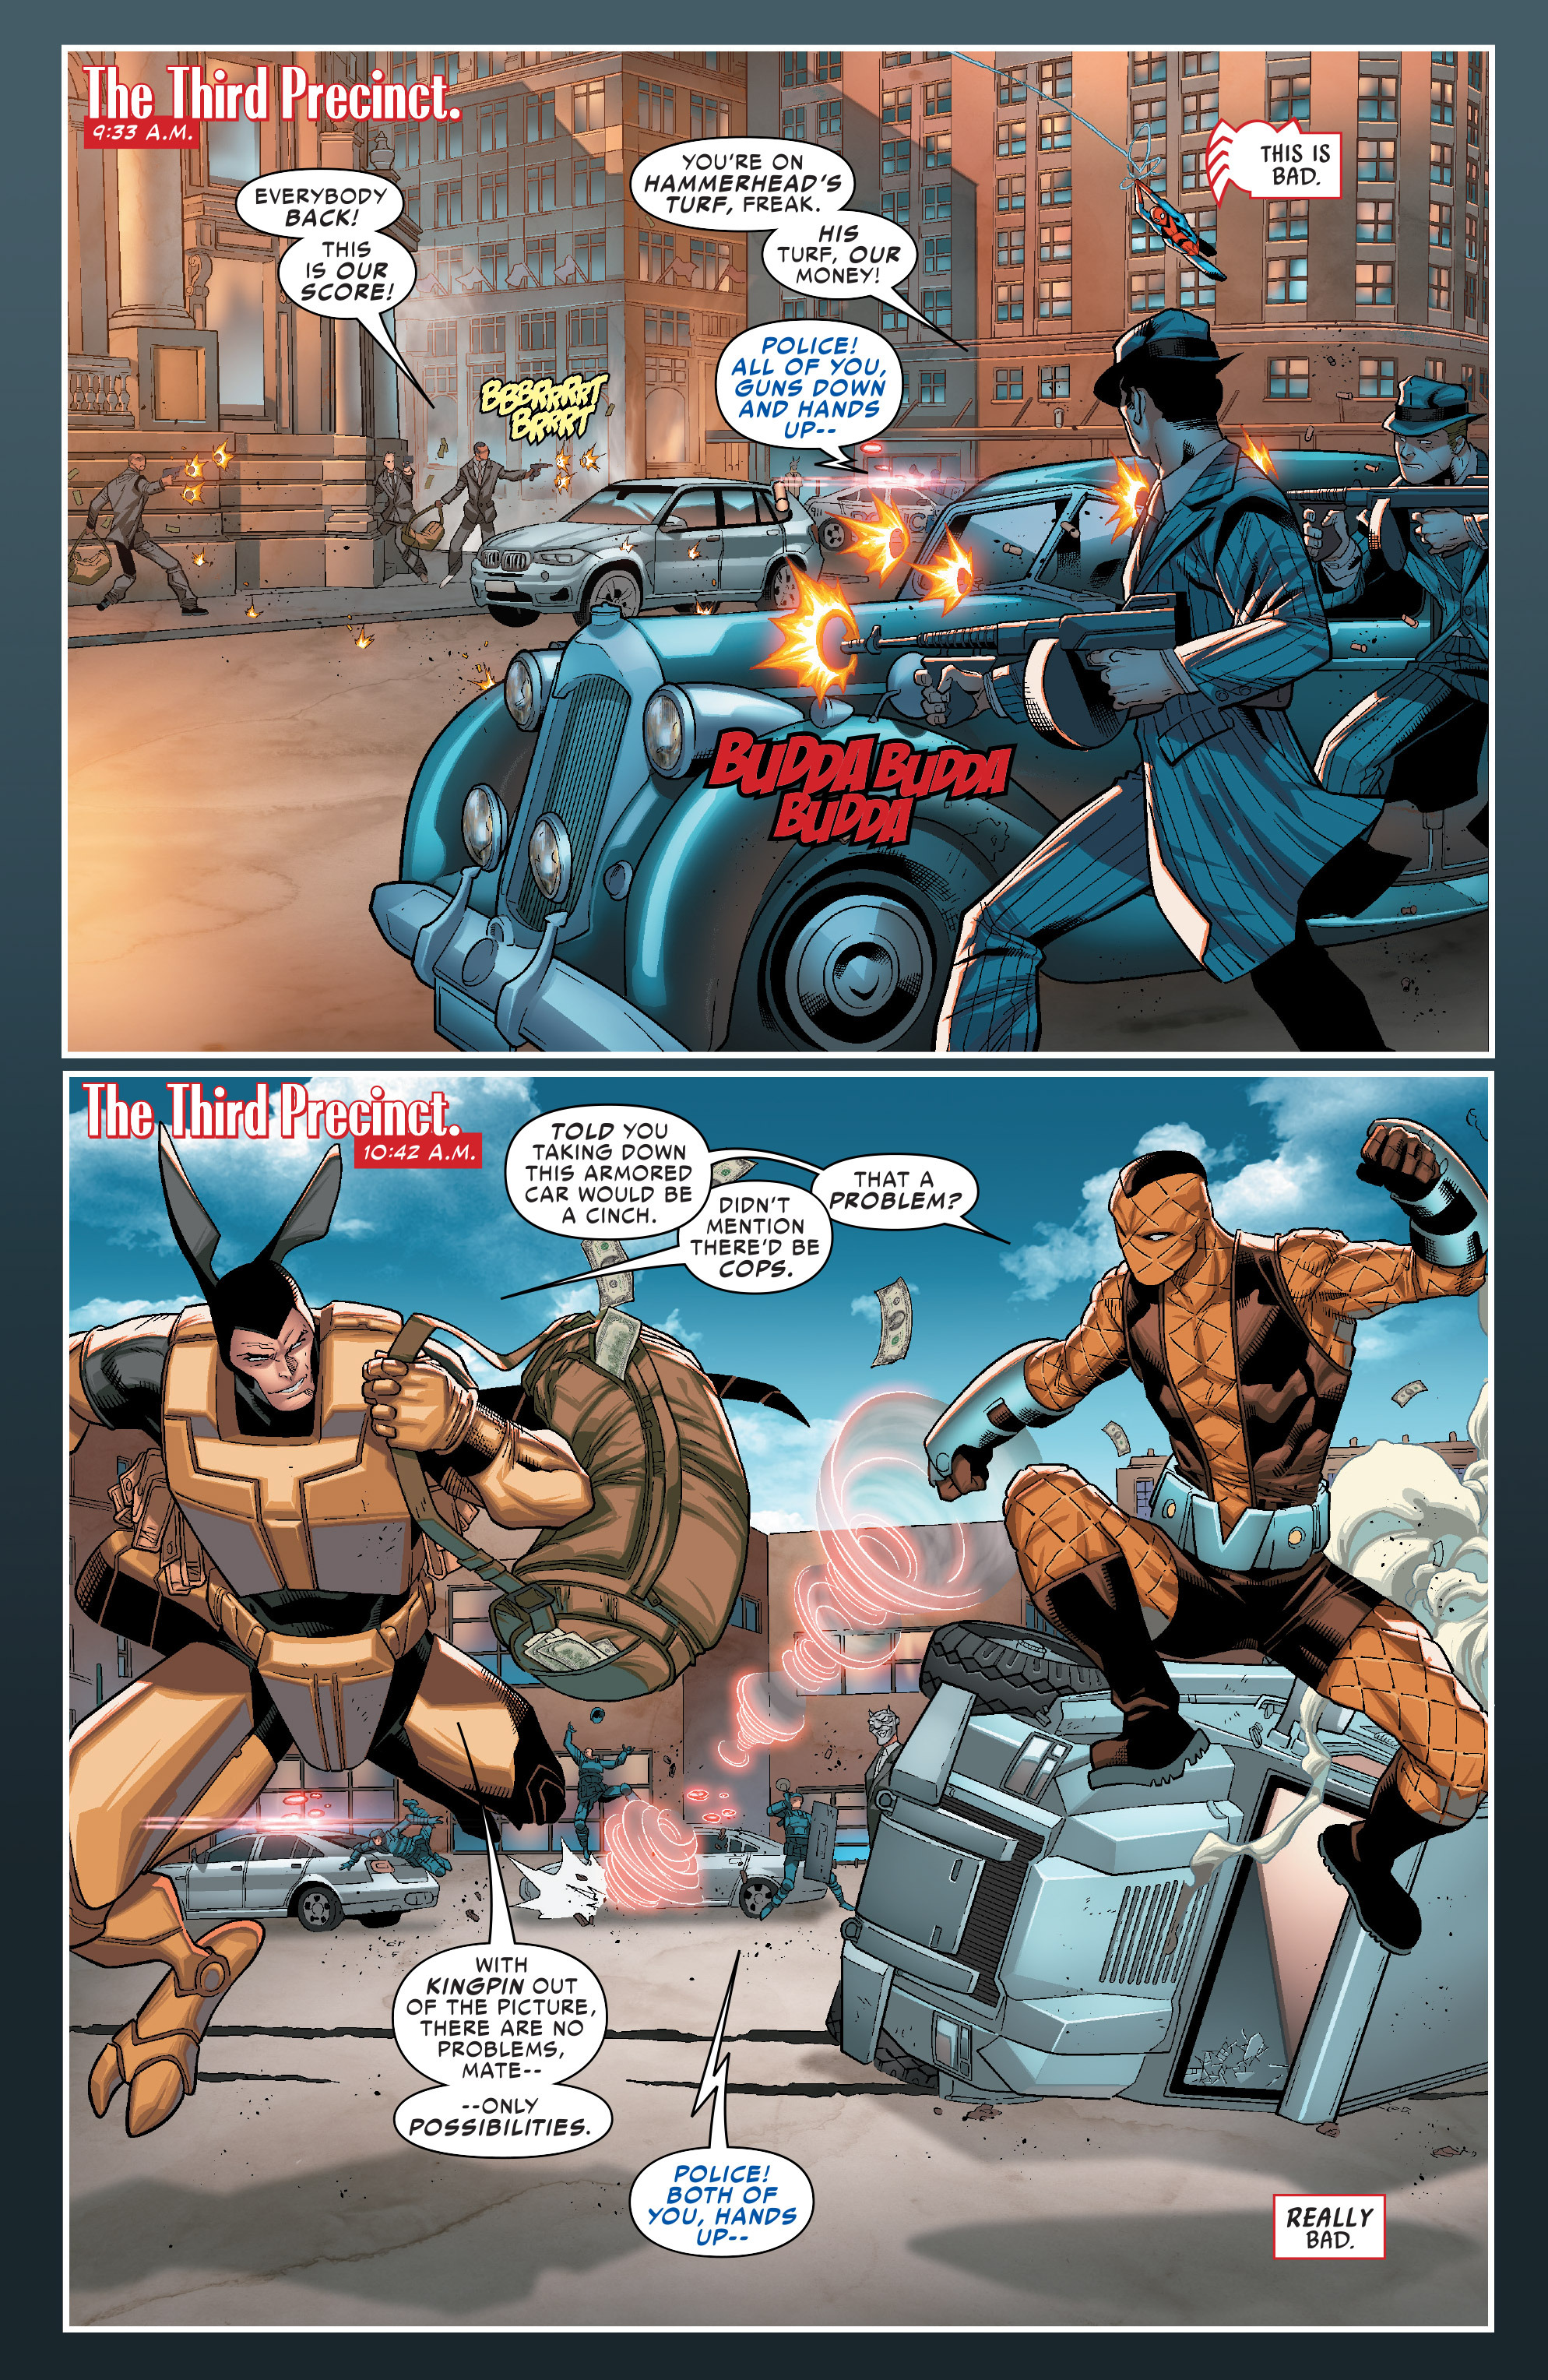 The Amazing Spider-Man (2014) issue 20.1 - Page 4